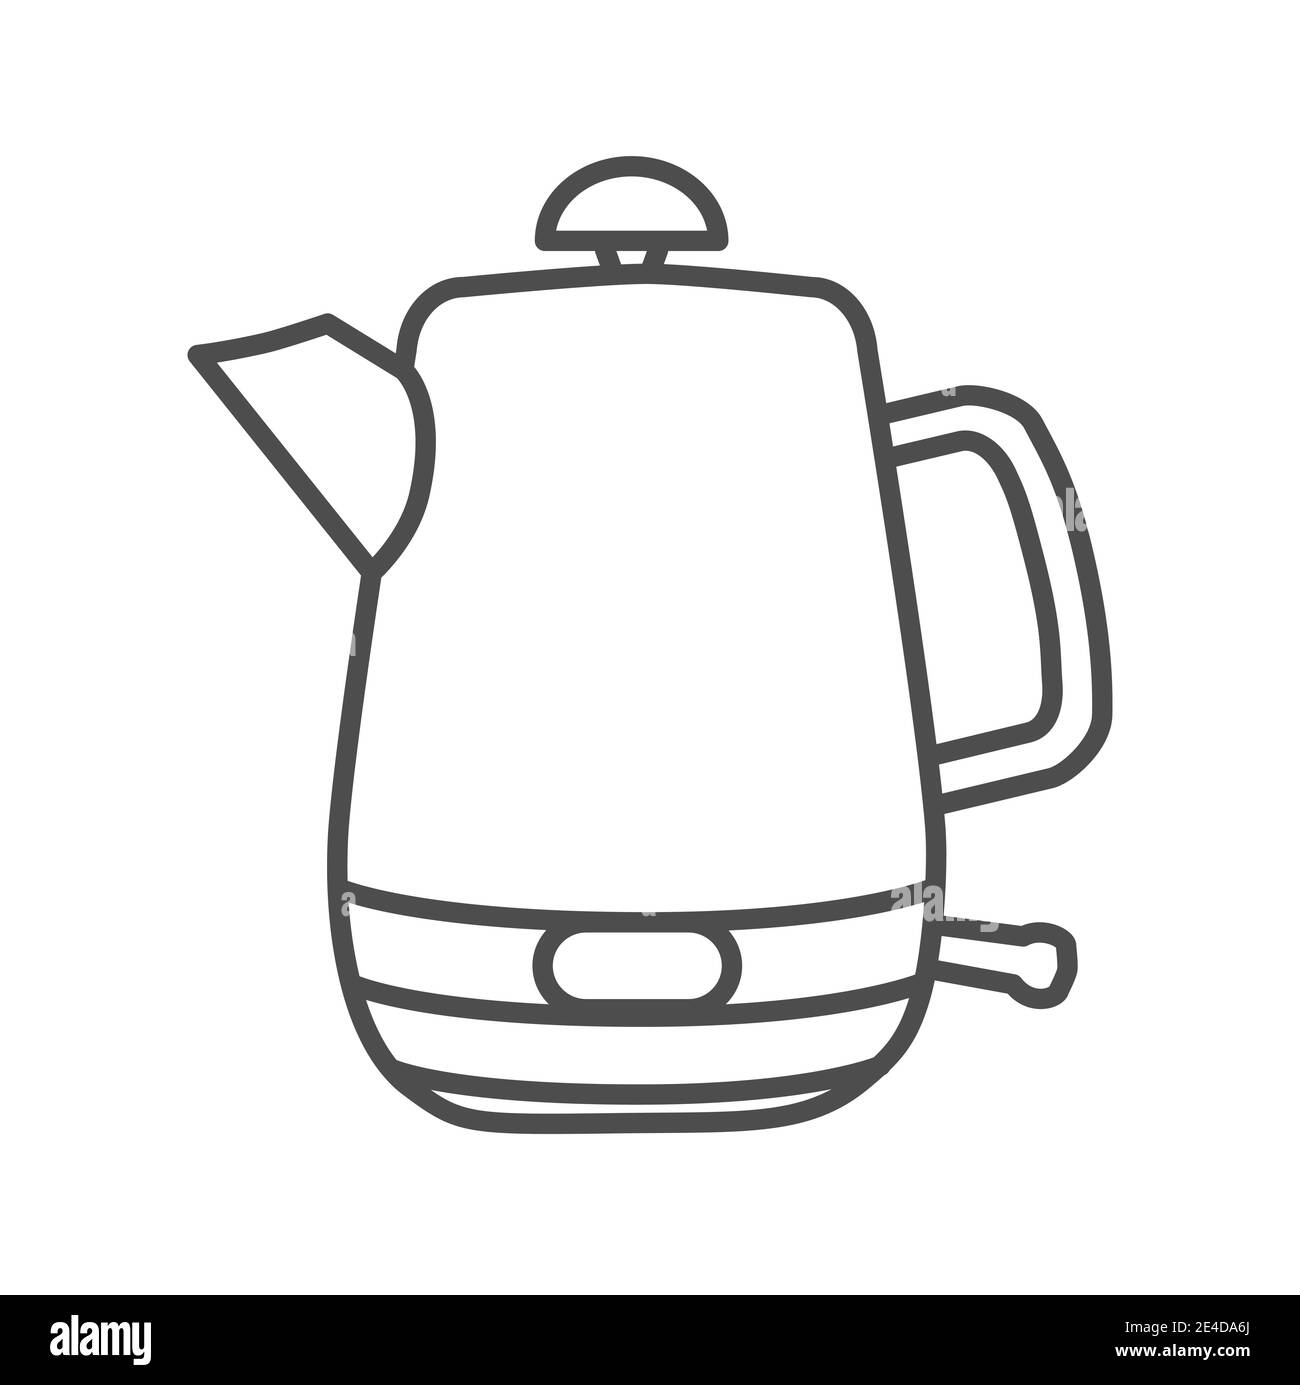 Electric stainless teapot thin line icon, modern kitchen utensils concept, modern water boiler sign on white background, electric kettle icon in Stock Vector